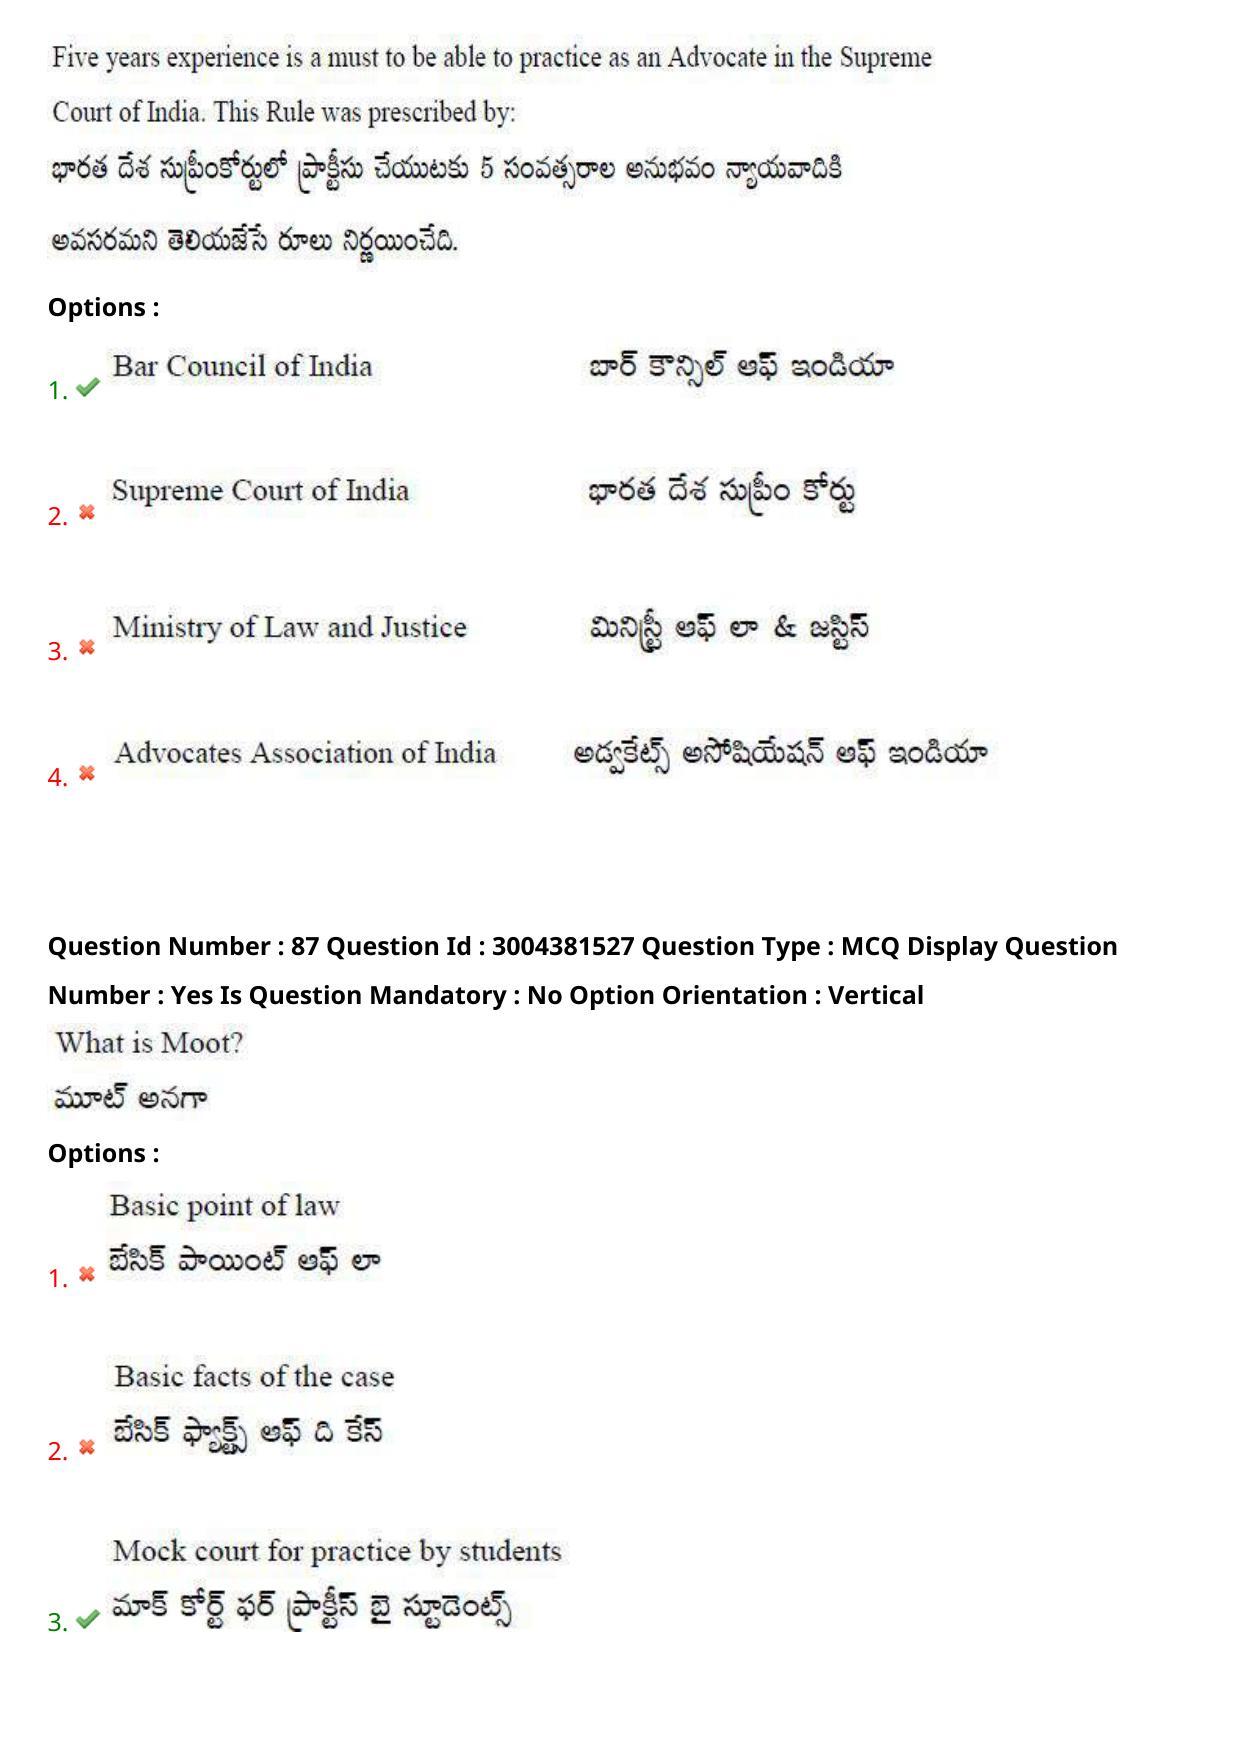 AP LAWCET 2020 - 3 Year LLB Question Paper With Keys - Page 57